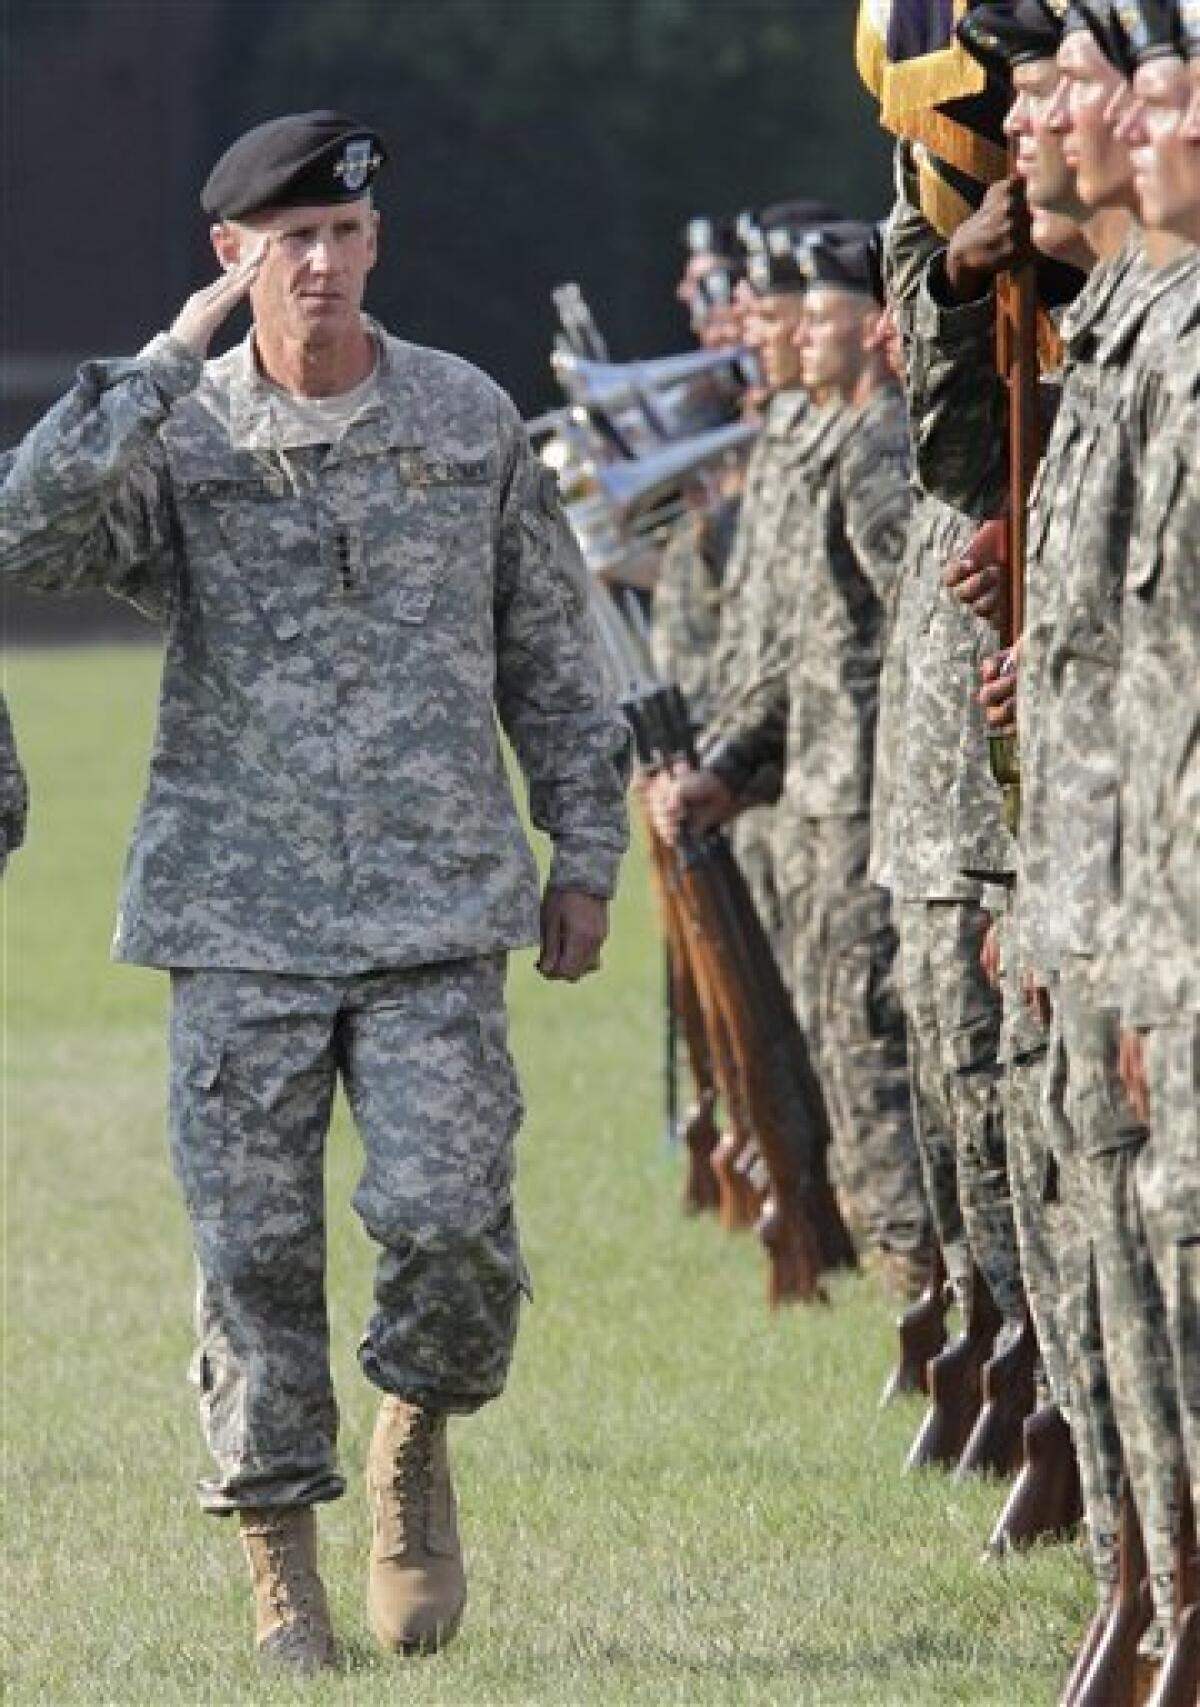 Gen. Stanley McChrystal reviews troops for the last time as he is honored at a retirement ceremony at Fort McNair in Washington, Friday, July 23, 2010. McChrystal's illustrious career came to an abrupt end when he resigned as the top U.S. commander in Afghanistan after he and his staff were quoted in a Rolling Stone magazine article criticizing and mocking key Obama Administration officials. (AP Photo/J. Scott Applewhite) — AP